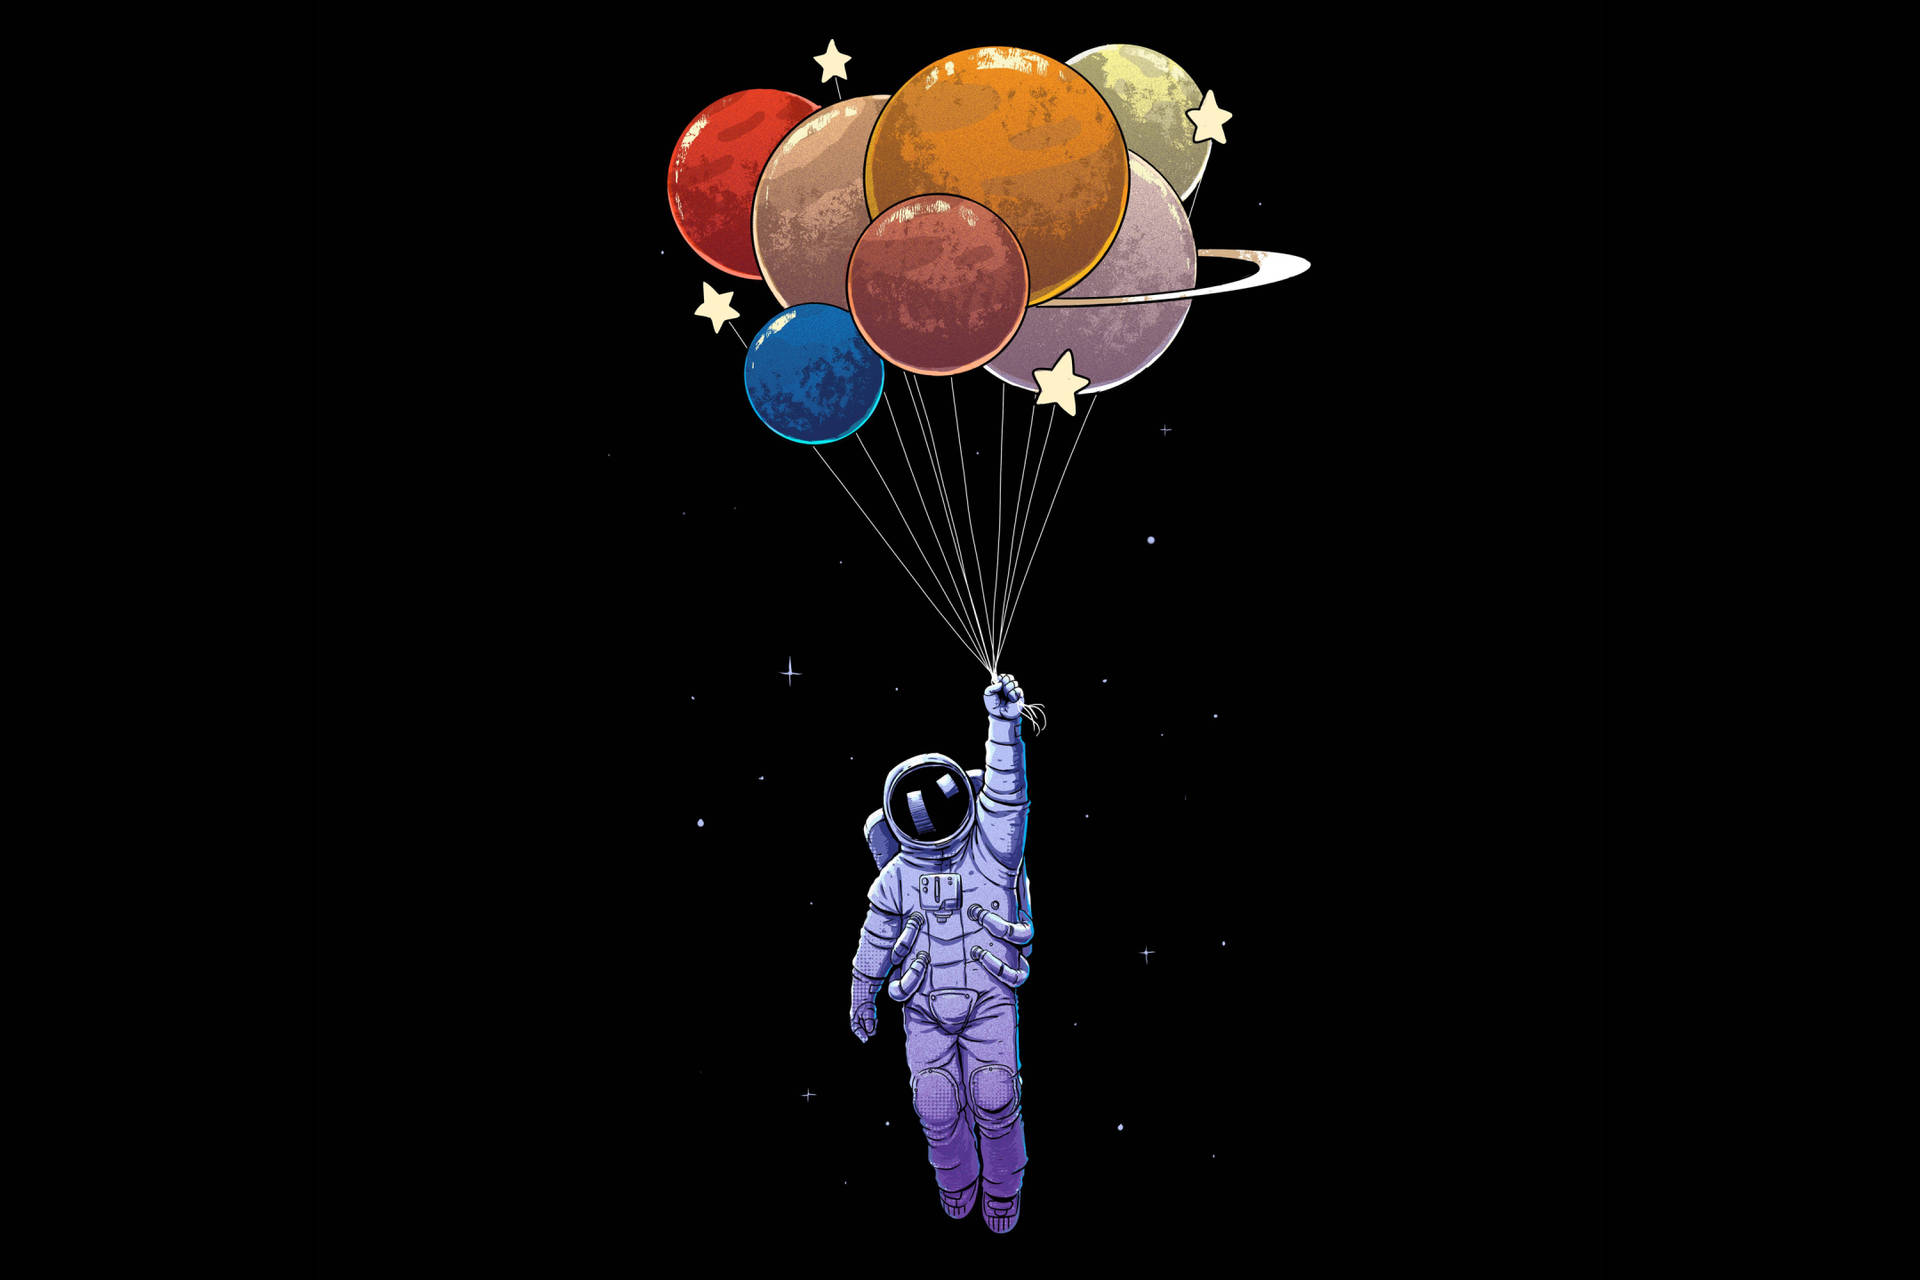 Astronaut With Balloons Image